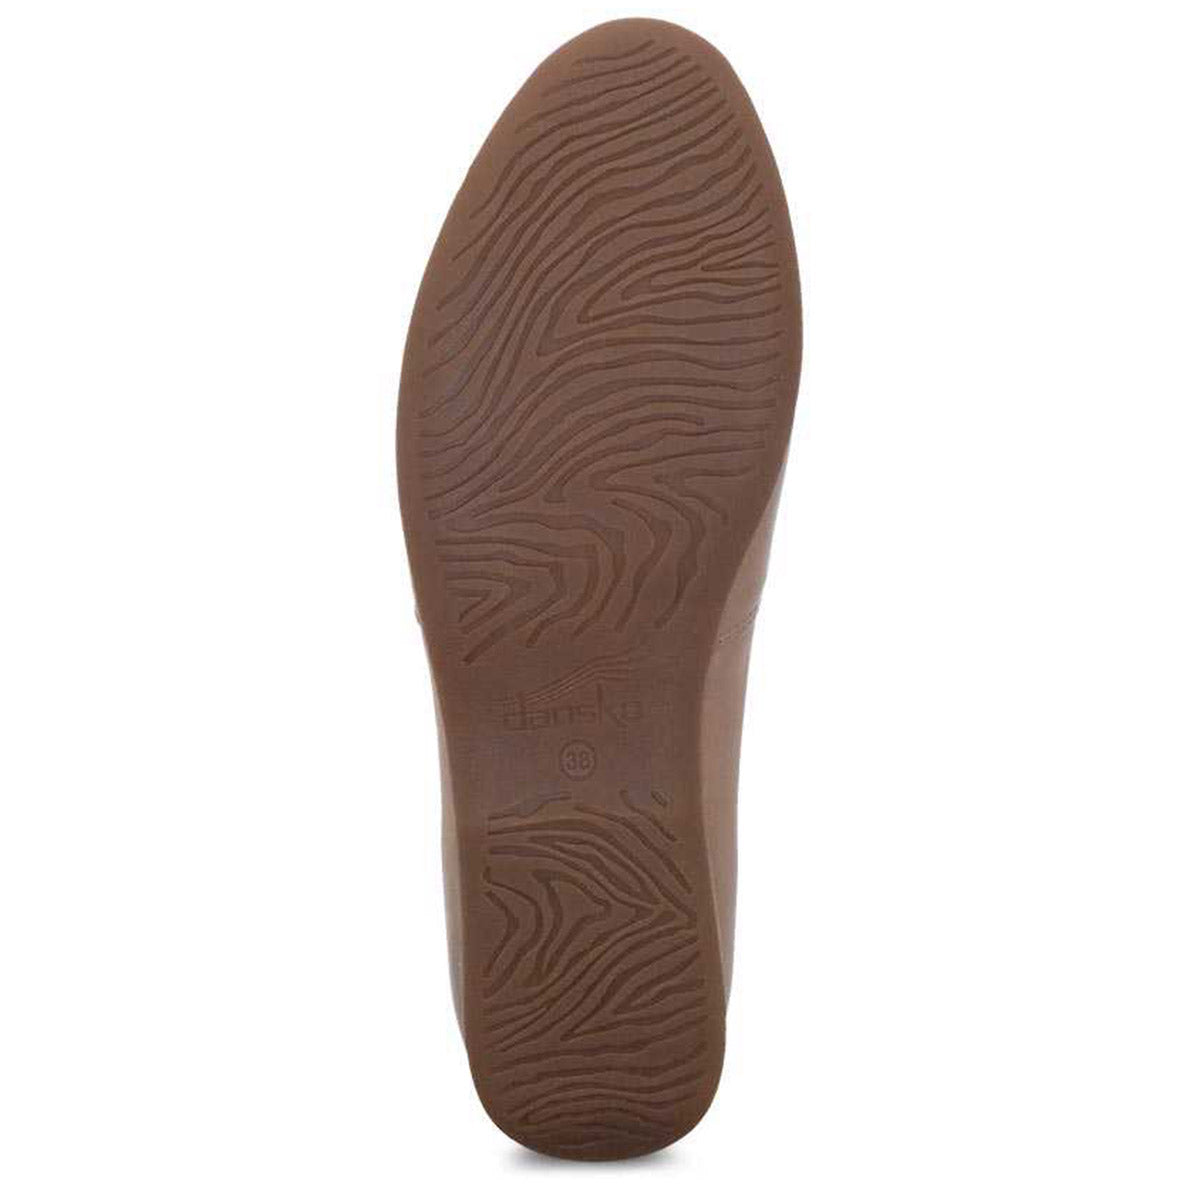 Sole of a Dansko Larisa Tan women&#39;s flat shoe with textured pattern and brand imprint.